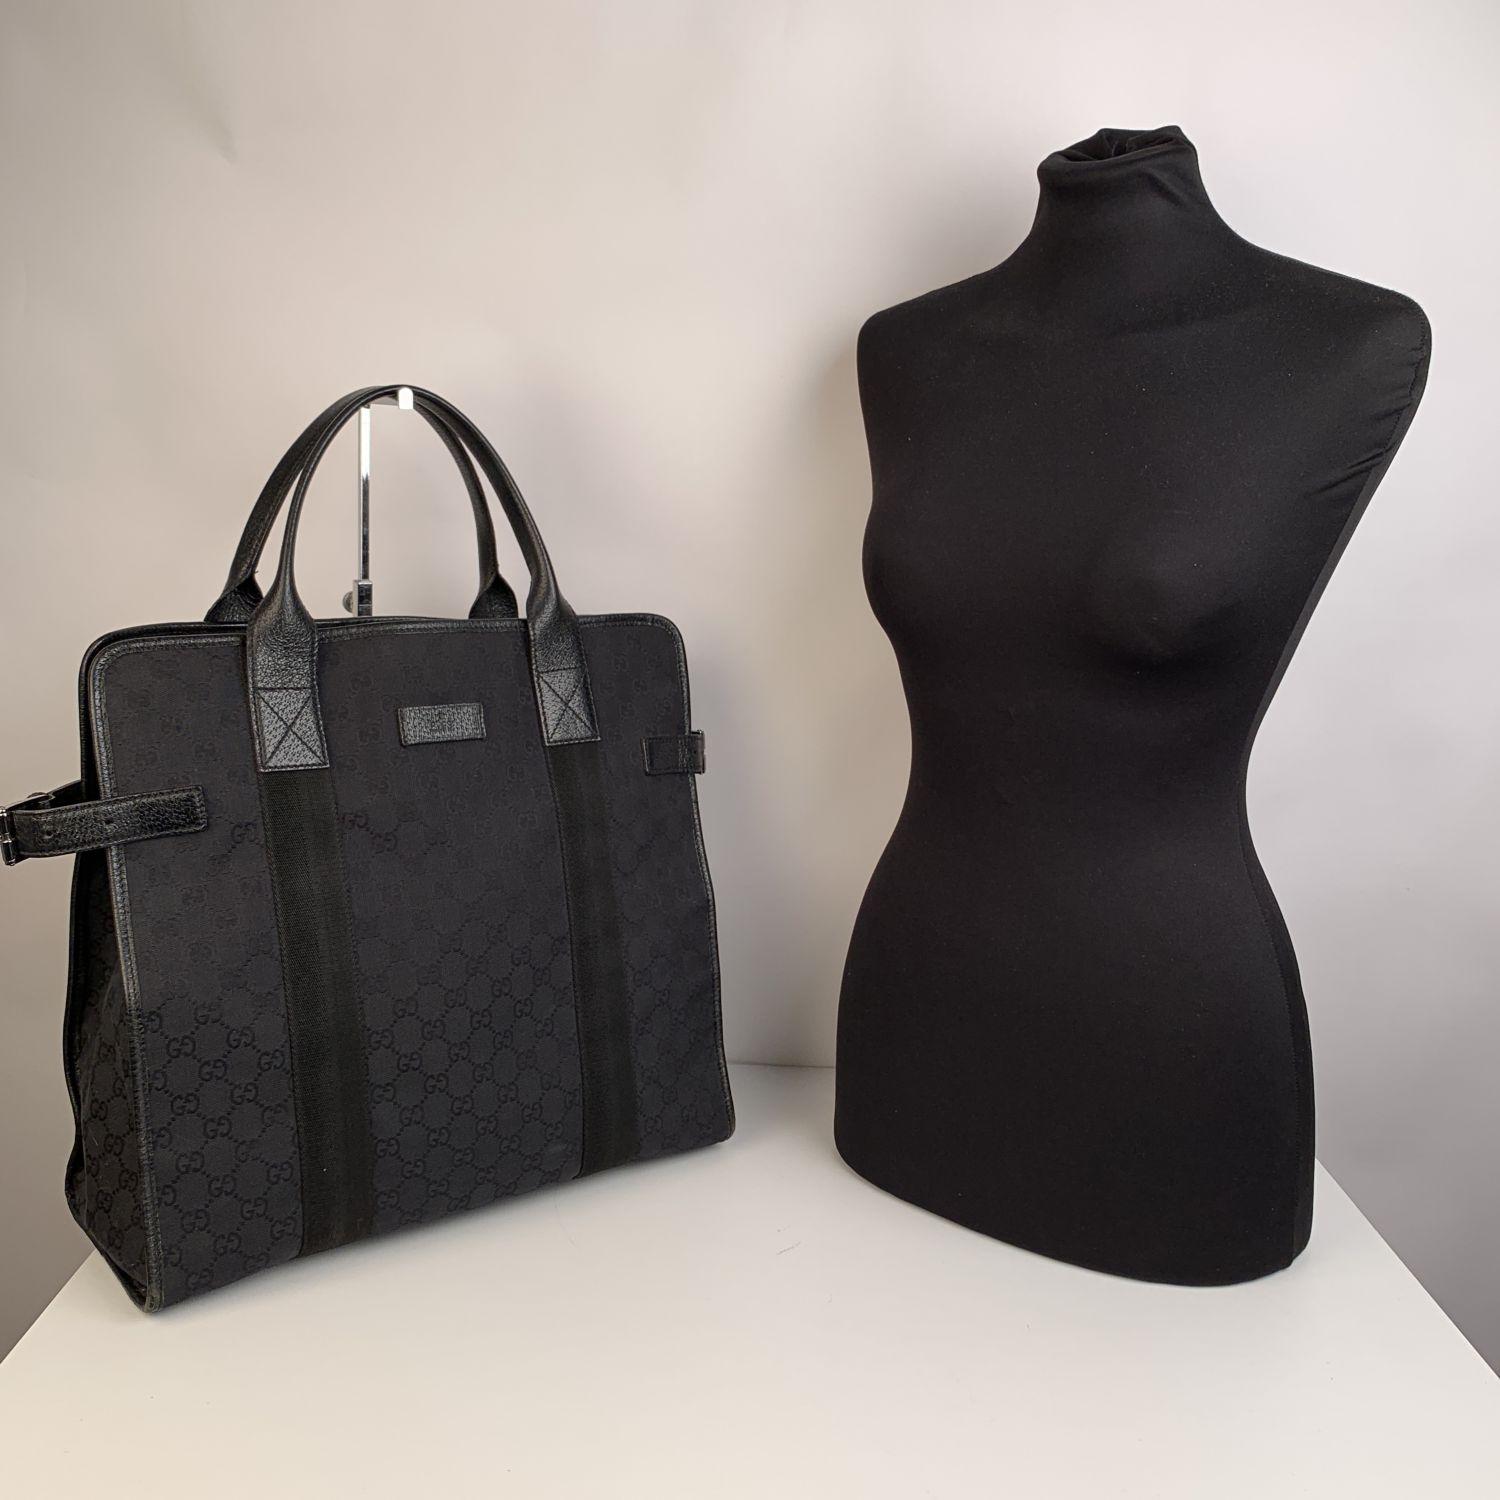 Gucci Black Monogram Canvas Shopping Bag Shopper Tote In Excellent Condition In Rome, Rome